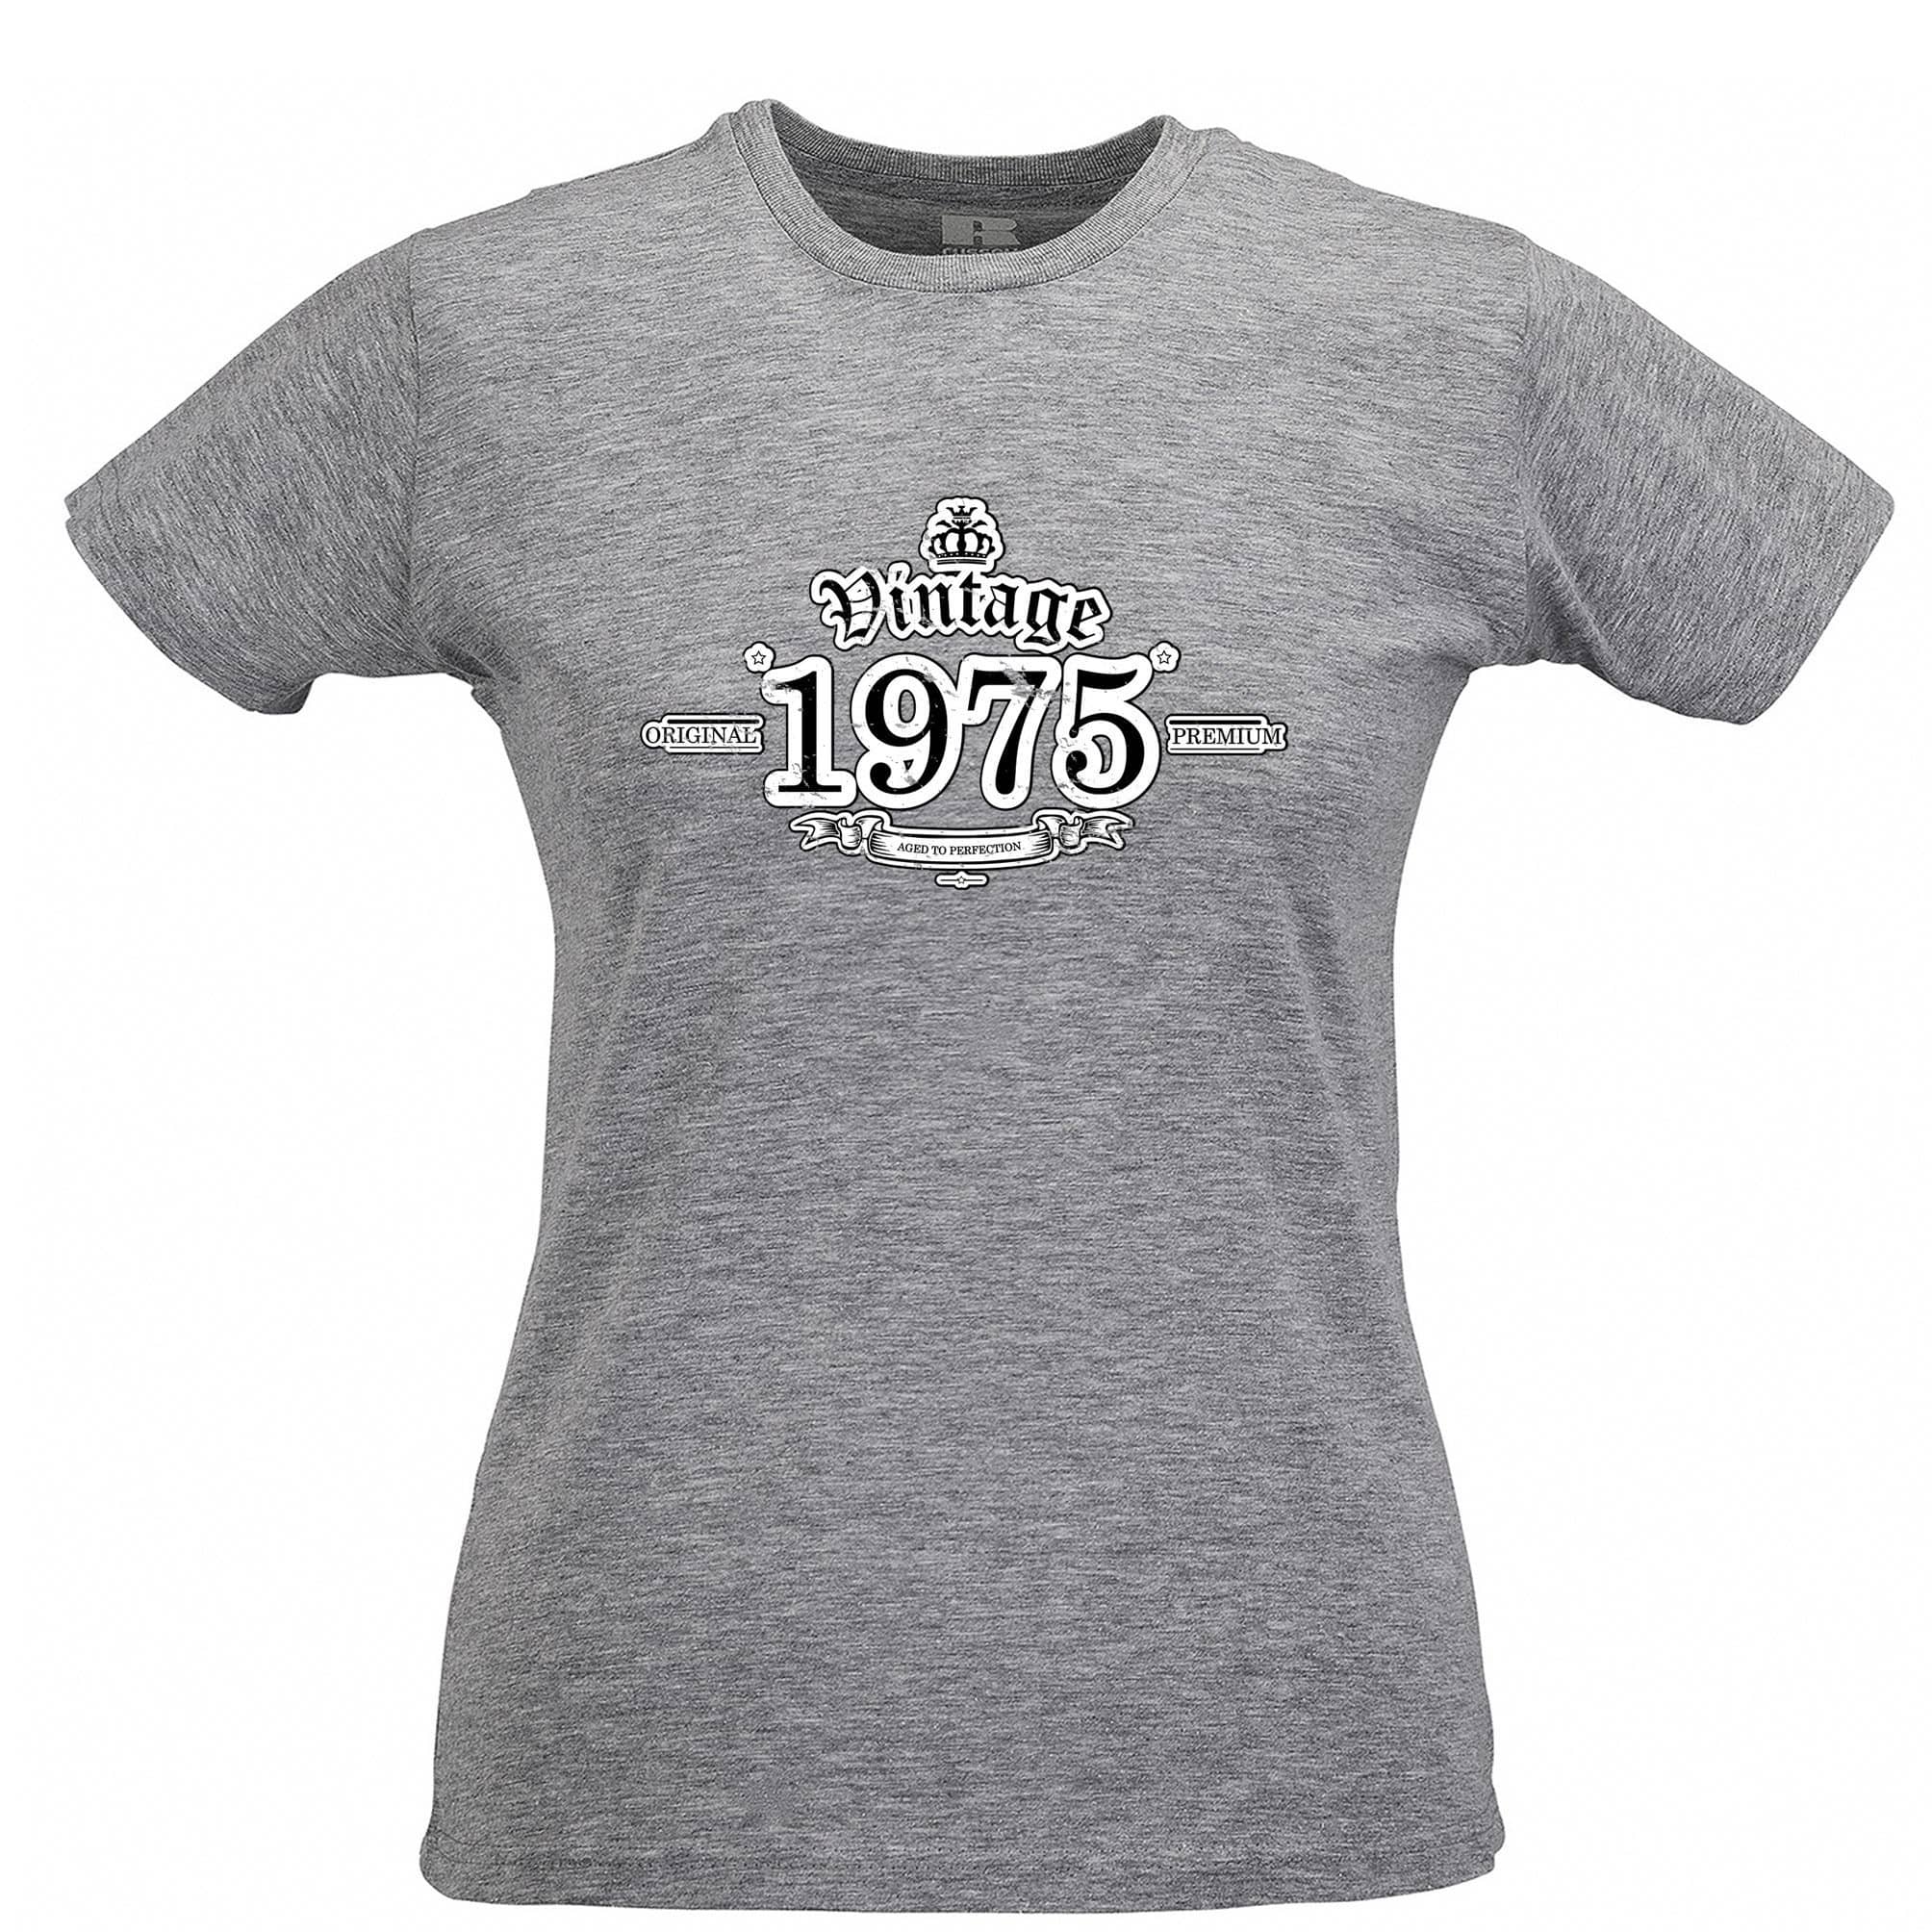 43rd Birthday Womens T Shirt Vintage 1975 Aged To Perfection